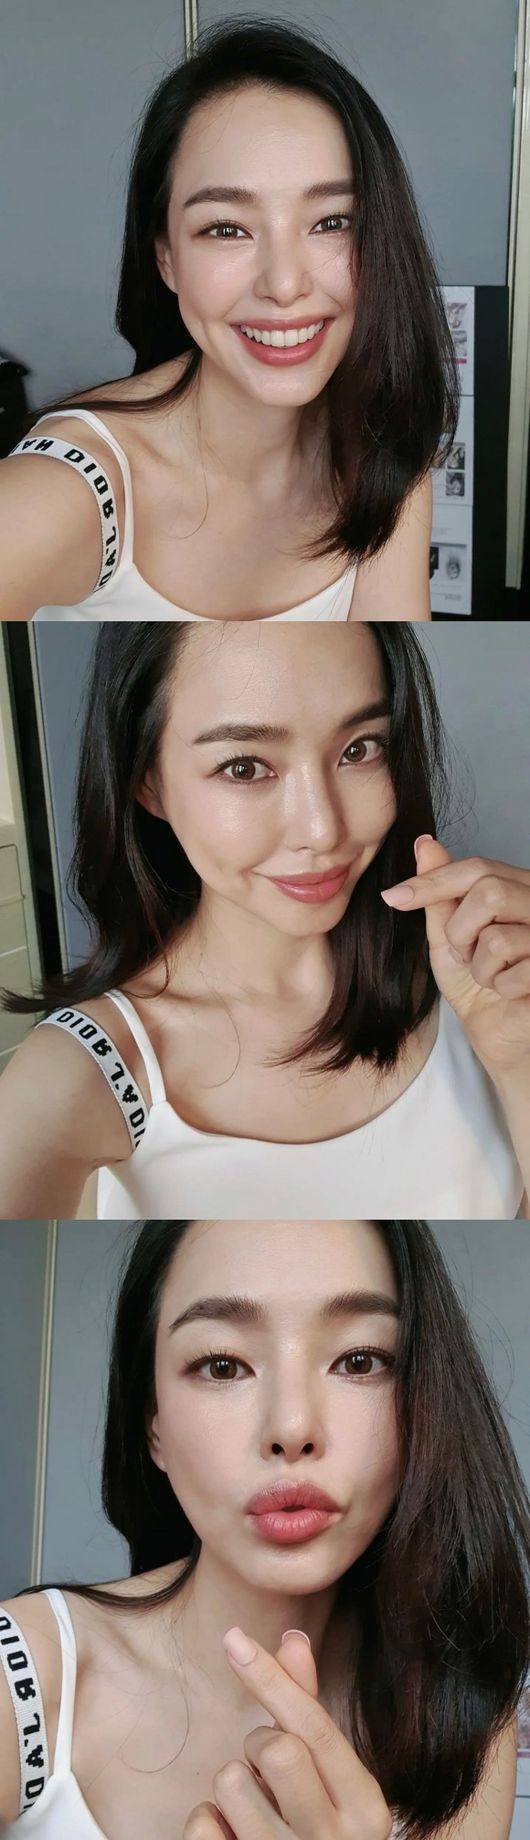 Actor Lee Ha-nui has shared her latest on pregnancy.Lee Ha-nui said on his personal instagram on the 8th, The spring flowers on the roadside these days are so beautiful!Good spring day, lots of smiles, lots of happiness! And posted several photos.Lee Ha-nui in the public photo is shooting a self-portrait in a sleeveless outfit.Lee Ha-nui has a bright smile that tells her healthier than ever, and she boasts a slim visual without any big weight change during pregnancy.In particular, Lee Ha-nui is impressed with his usual Legend beauty, which is unbelievable that he is a pregnant woman.Meanwhile, Lee Ha-nui married an older businessman in December last year and is now pregnant.Lee Ha-nui SNS